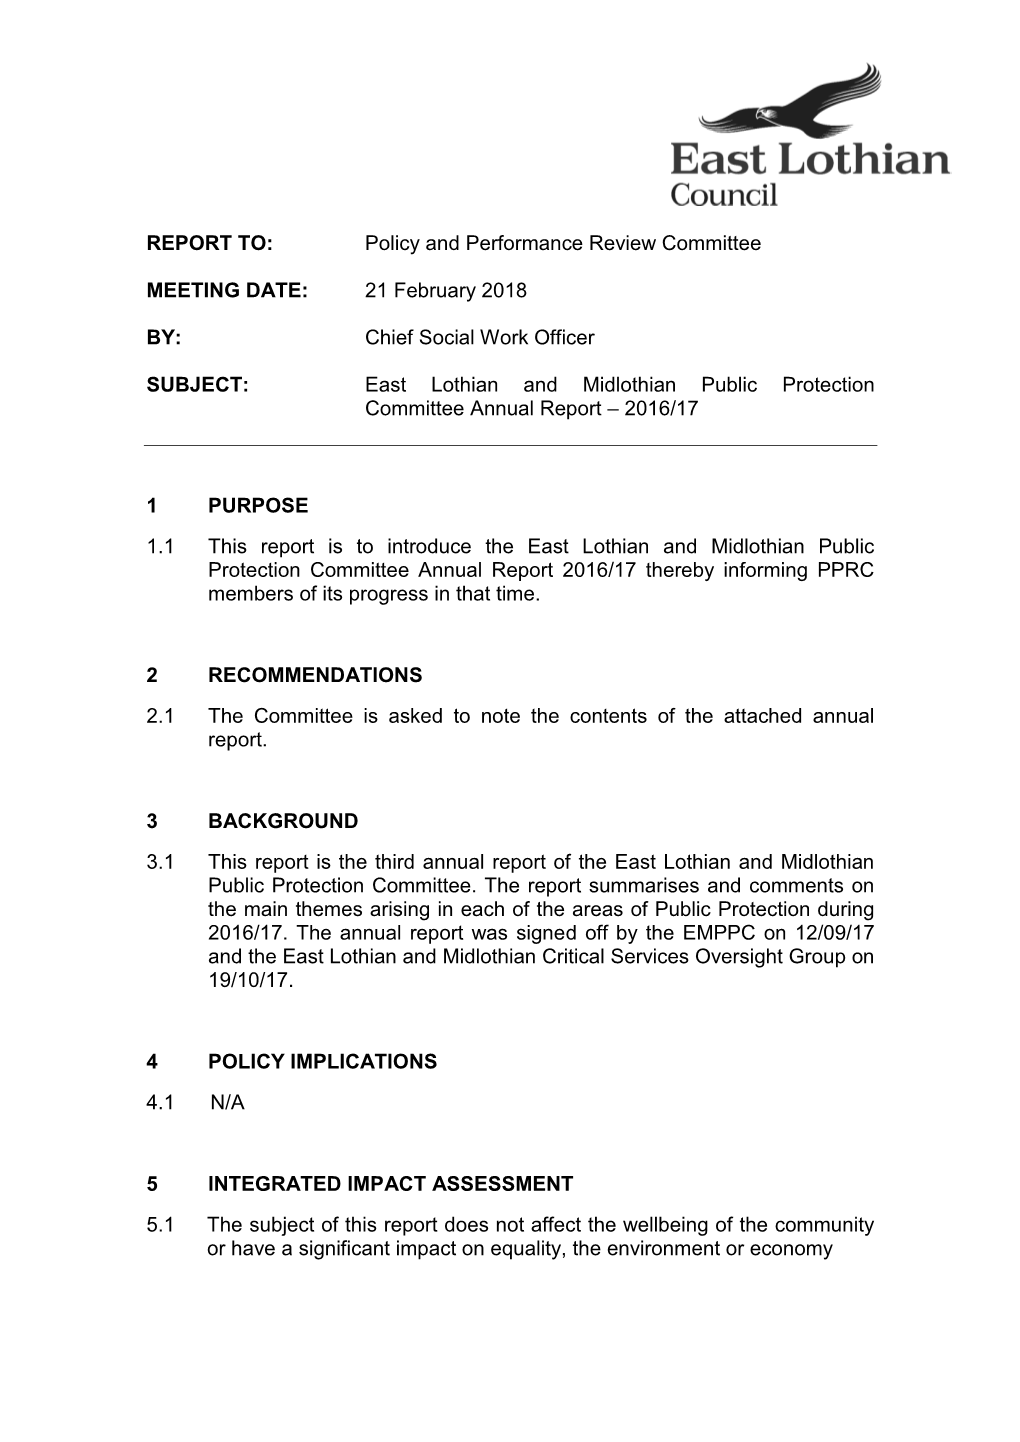 REPORT TO: Policy and Performance Review Committee MEETING DATE: 21 February 2018 BY: Chief Social Work Officer SUBJECT: East Lo